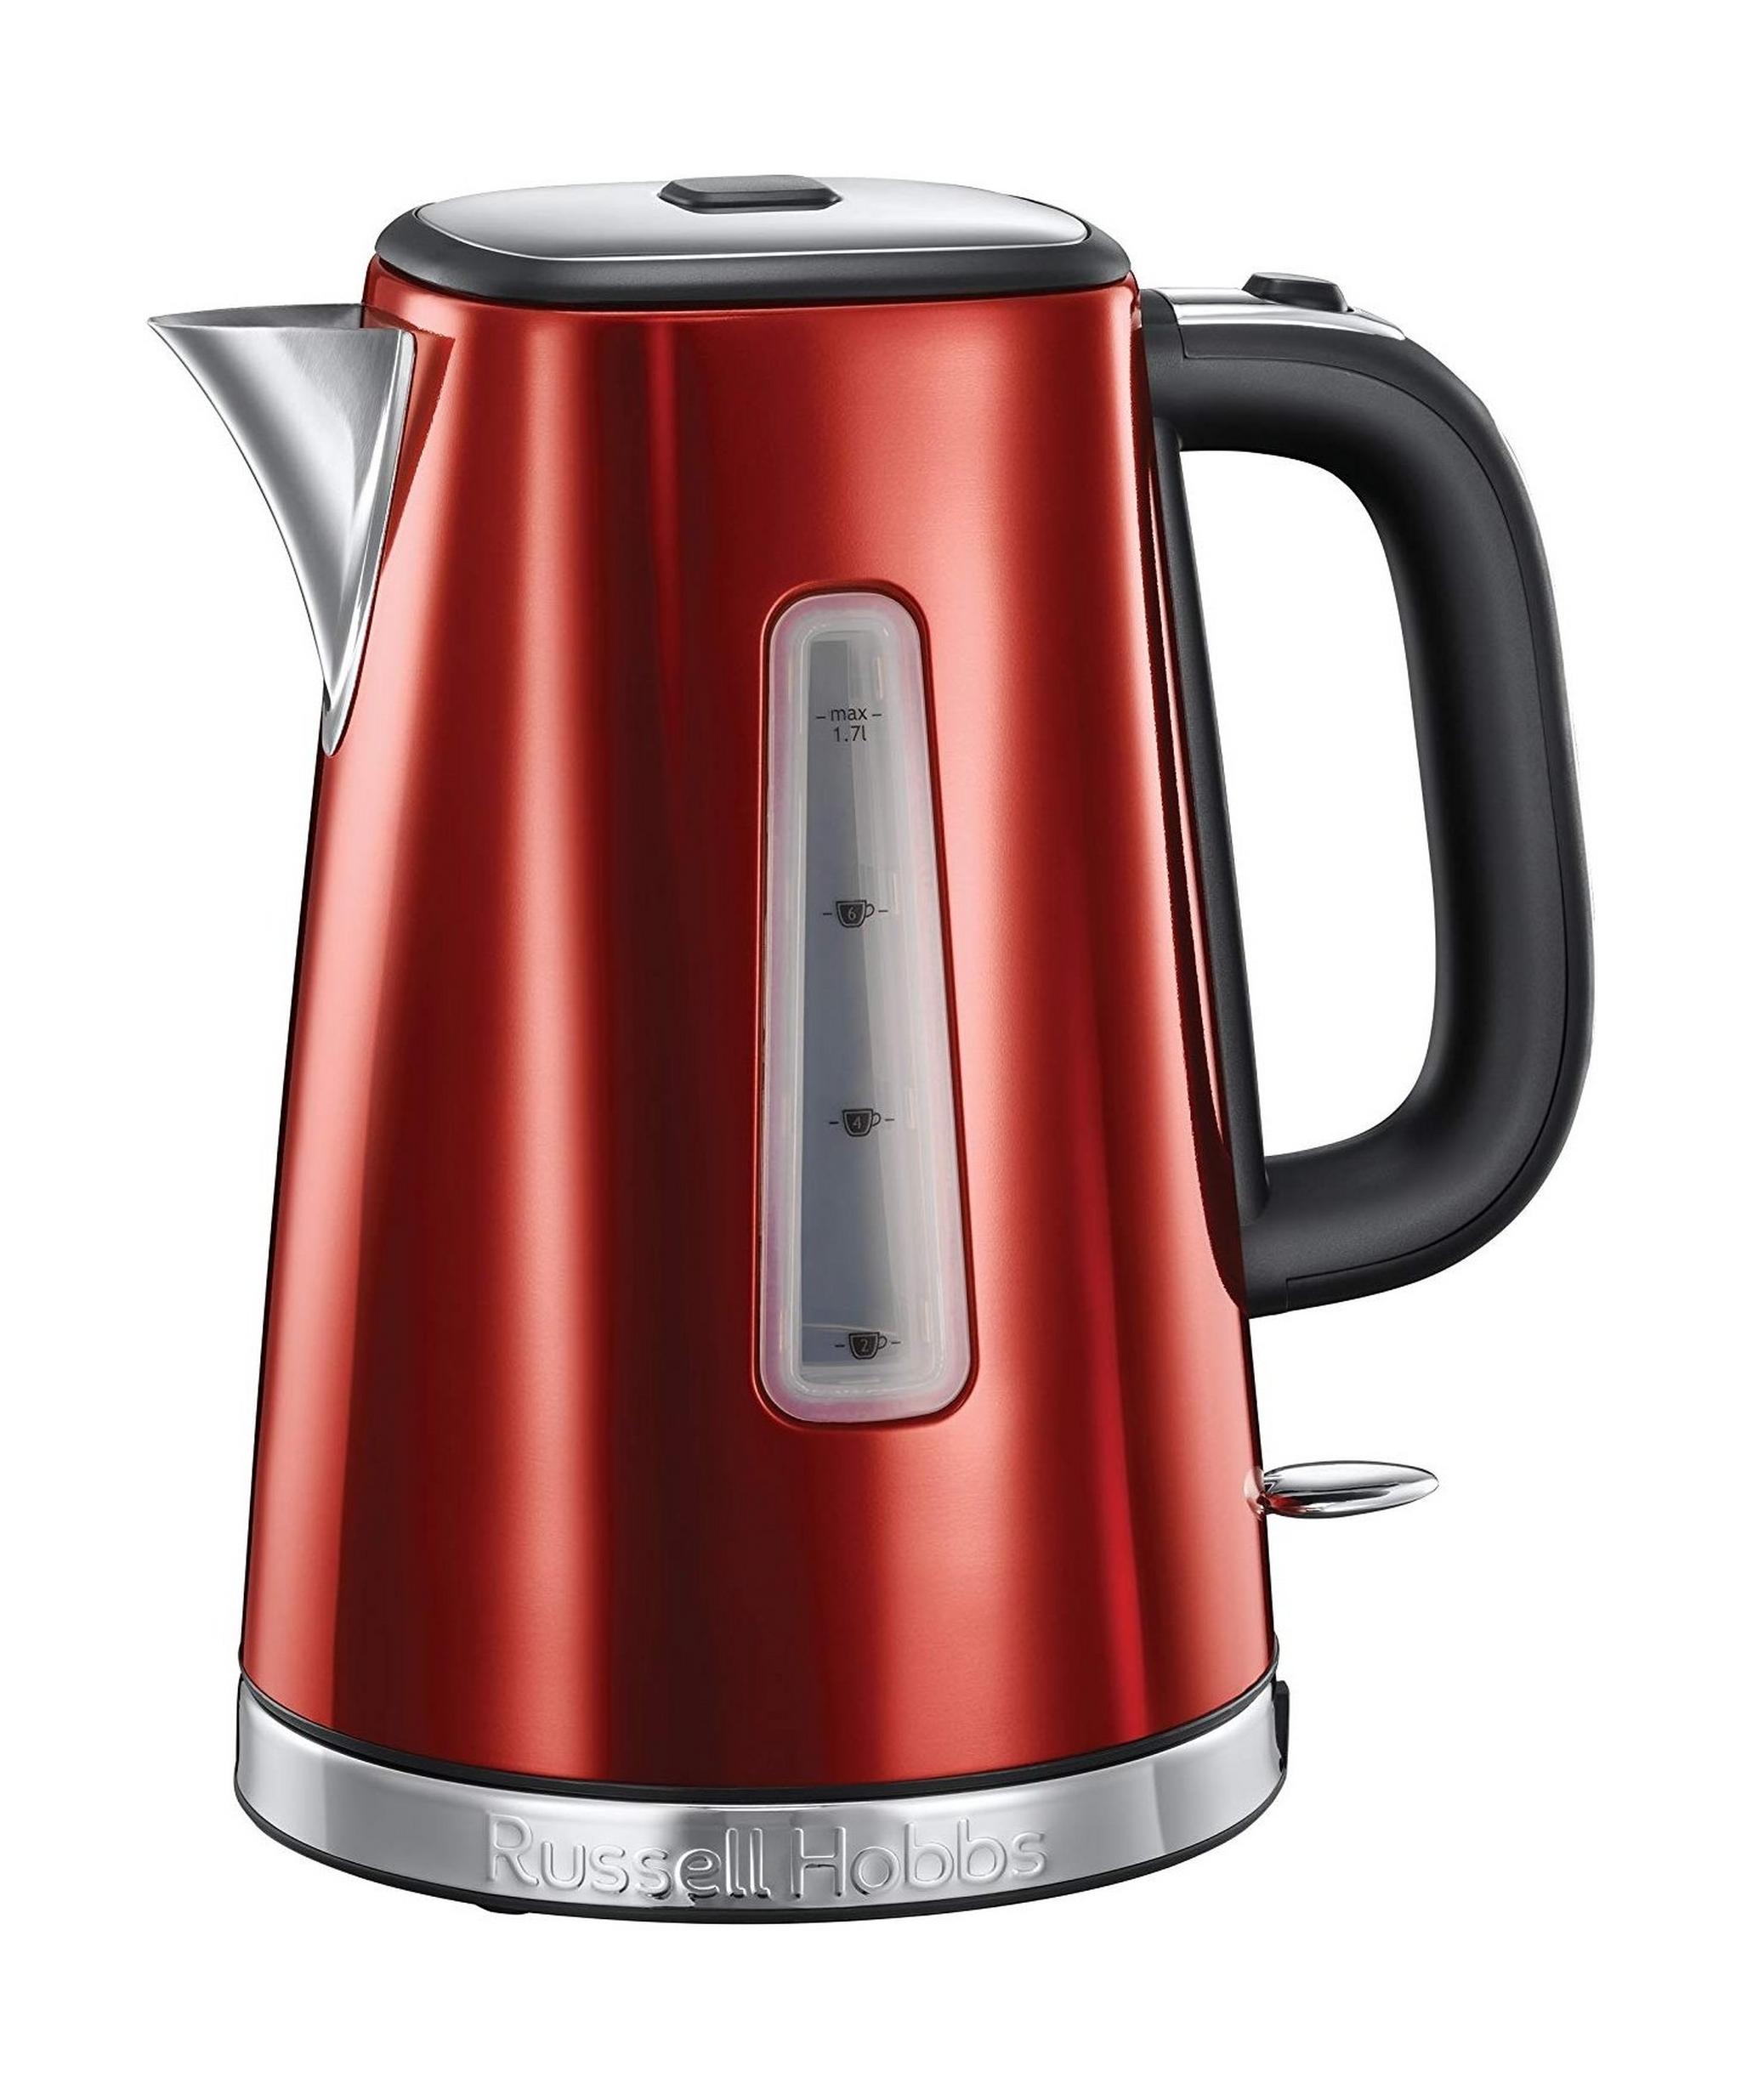 Russell Hobbs 1.7 L Luna Quiet Boil Electric Kettle (23210) - Red